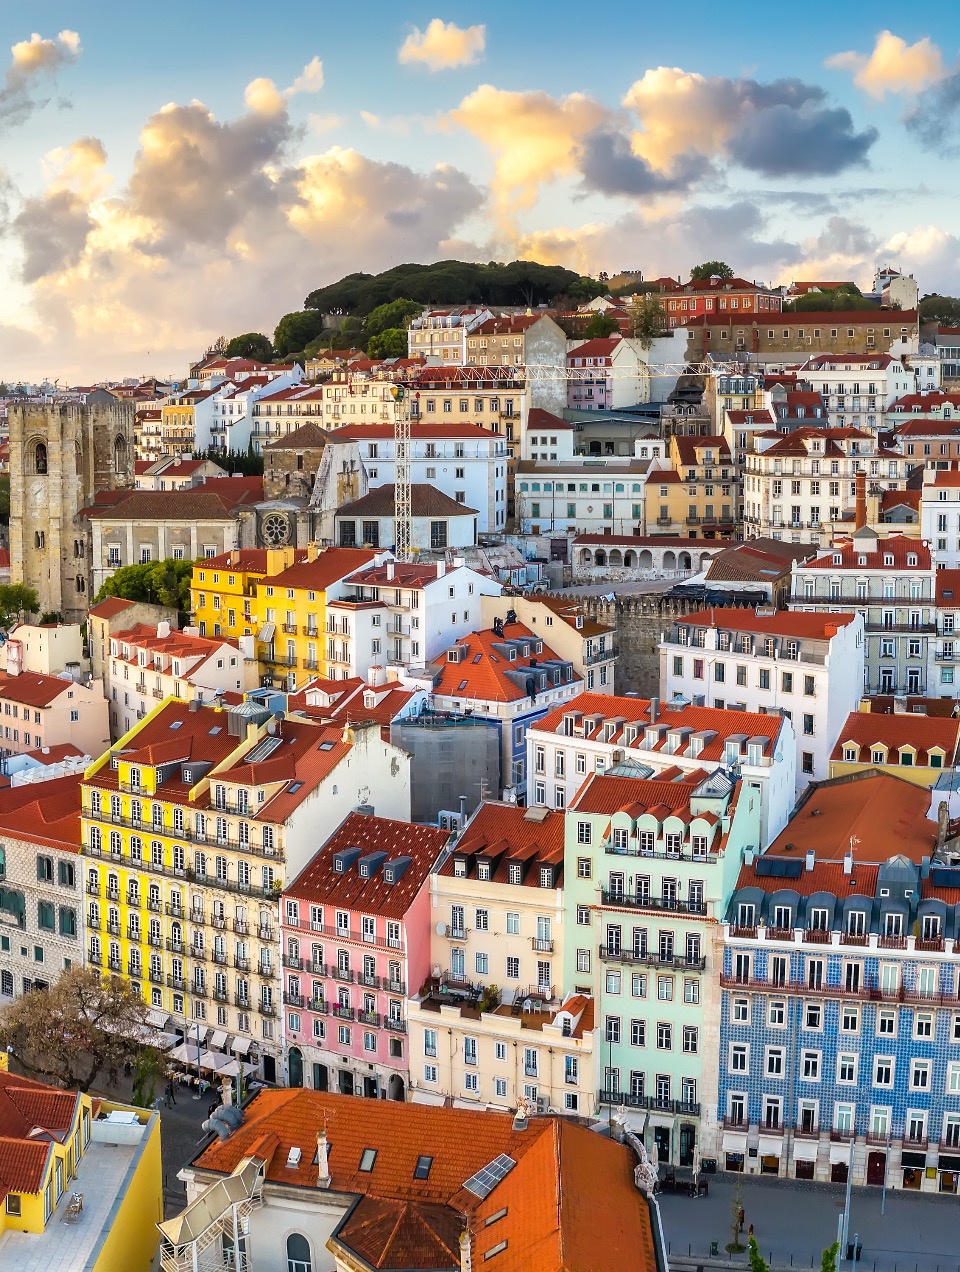 Finding housing in Portugal